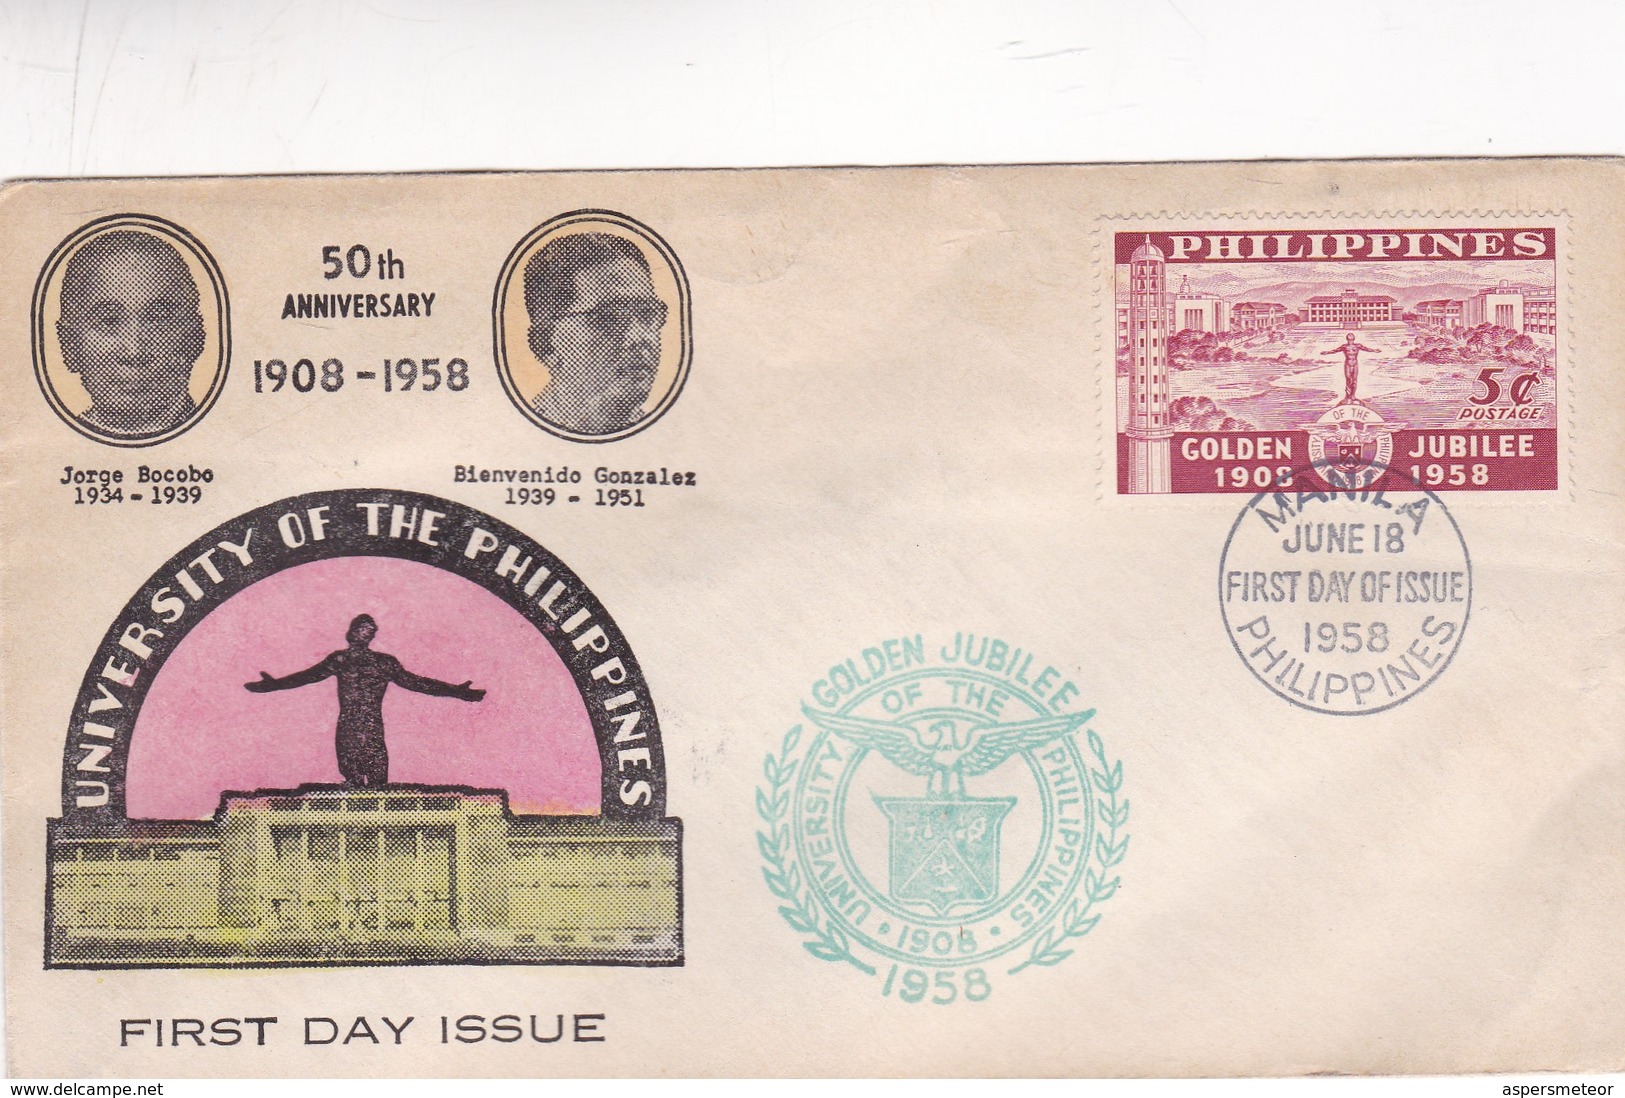 1958 FDC PHILIPPINES-UNIVERSITY OF THE PHILIPPINES, GOLDEN JUBILEE, 50TH ANNIVERSARY - BLEUP - Philippines